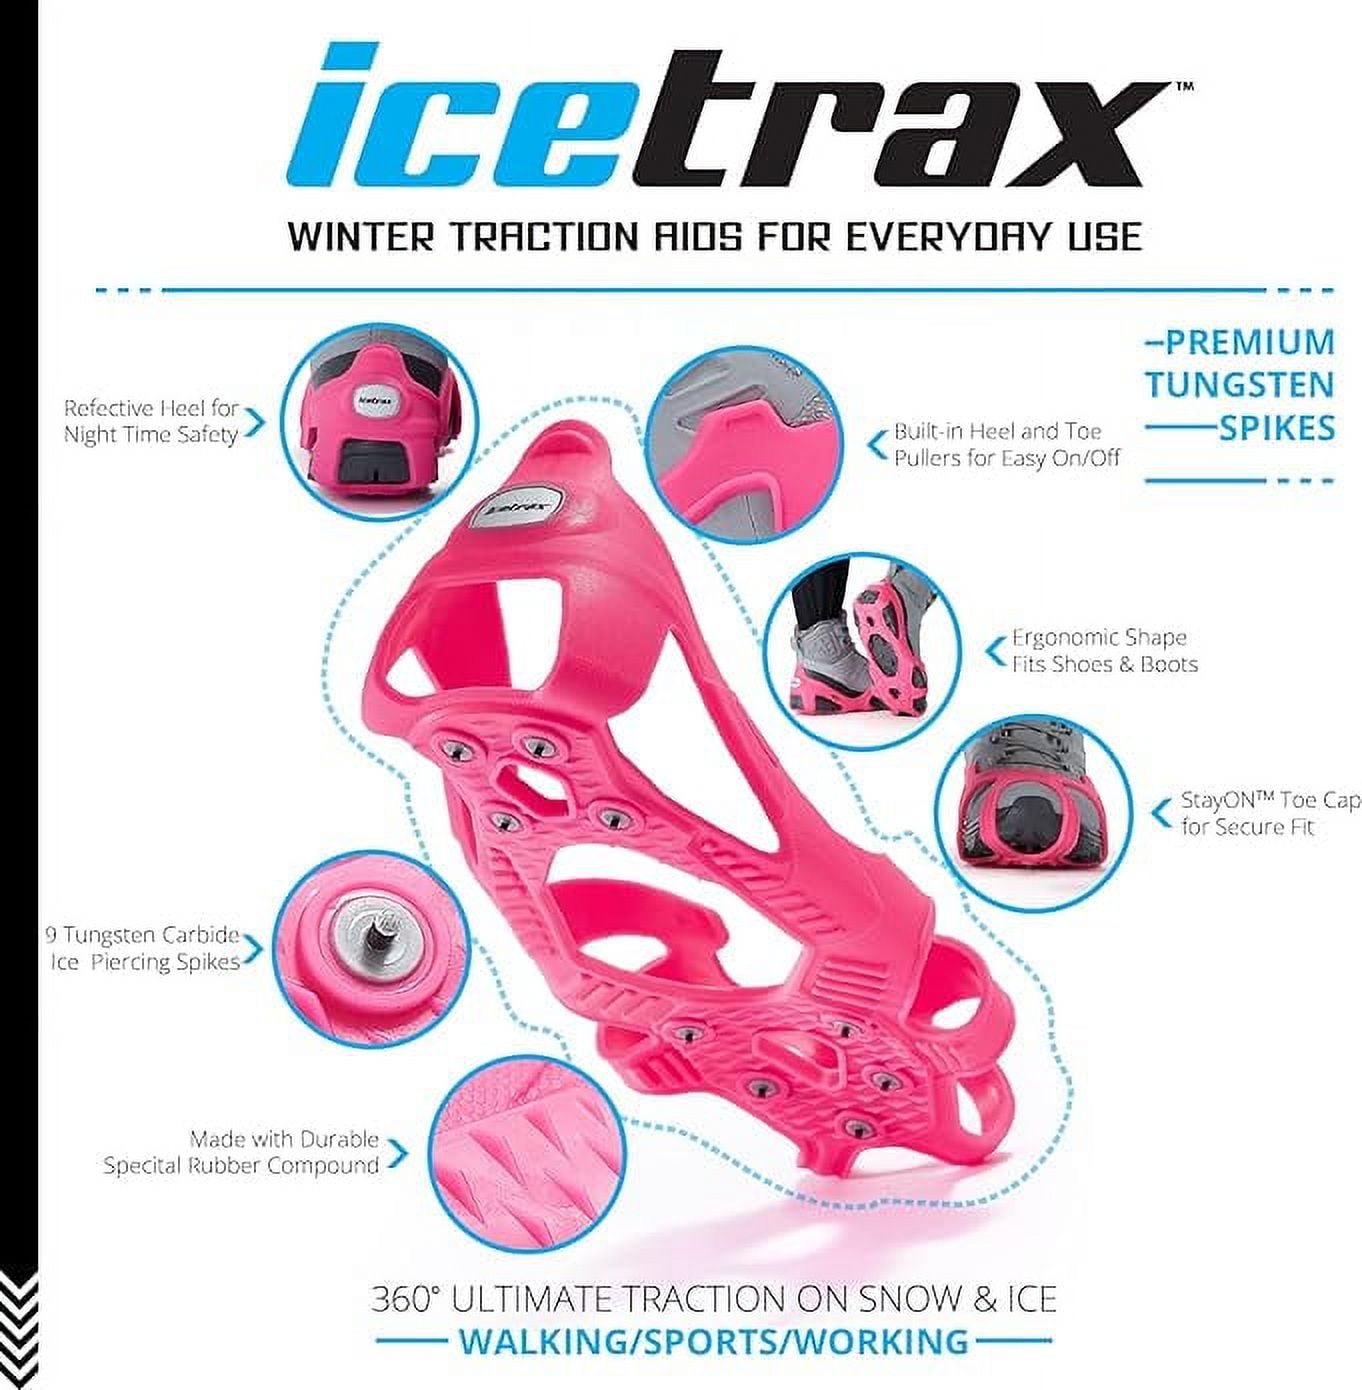 ICETRAX V3 Tungsten Crampons, Ice Cleats for Shoes and Boots - Ice